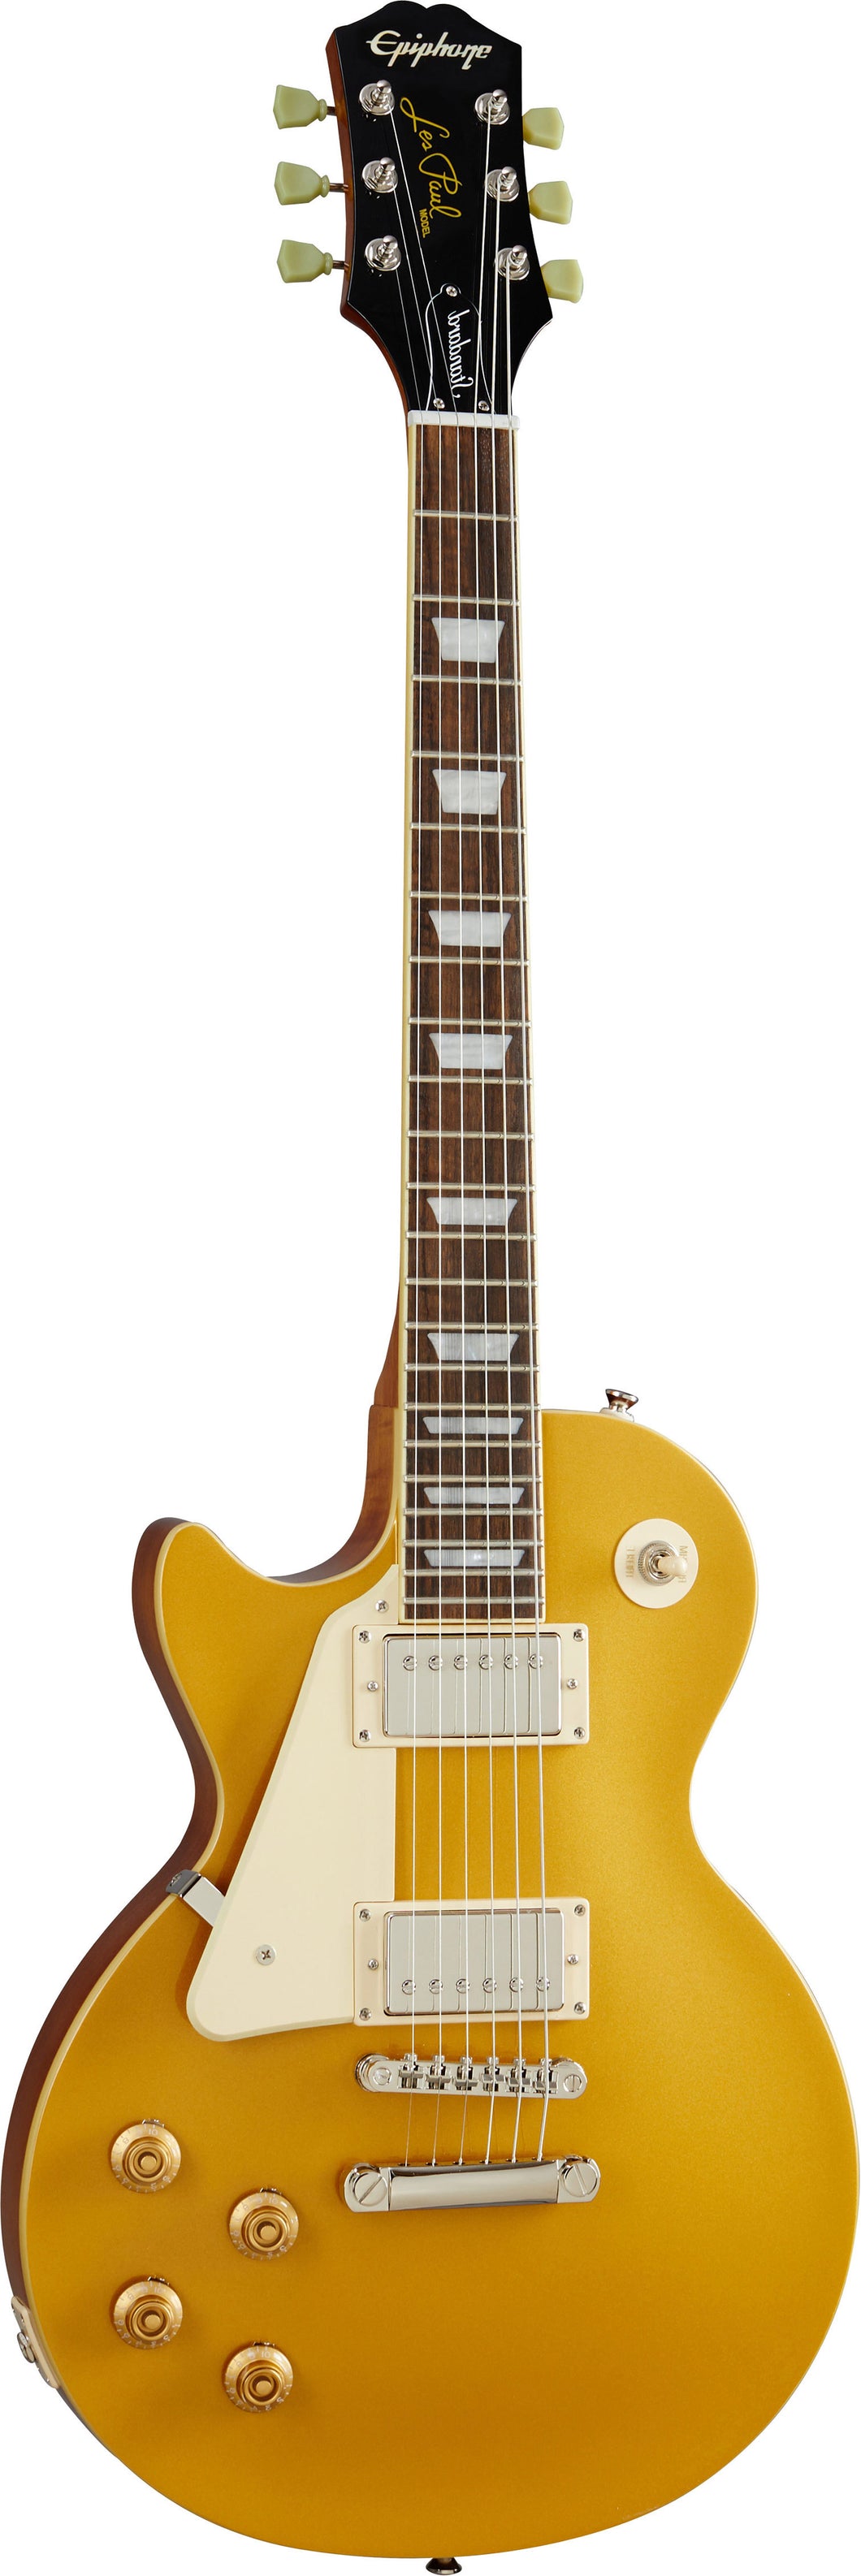 Epiphone Les Paul Standard '50s, Metallic Gold, Left Handed LH Lefty Electric Guitar BRAND NEW